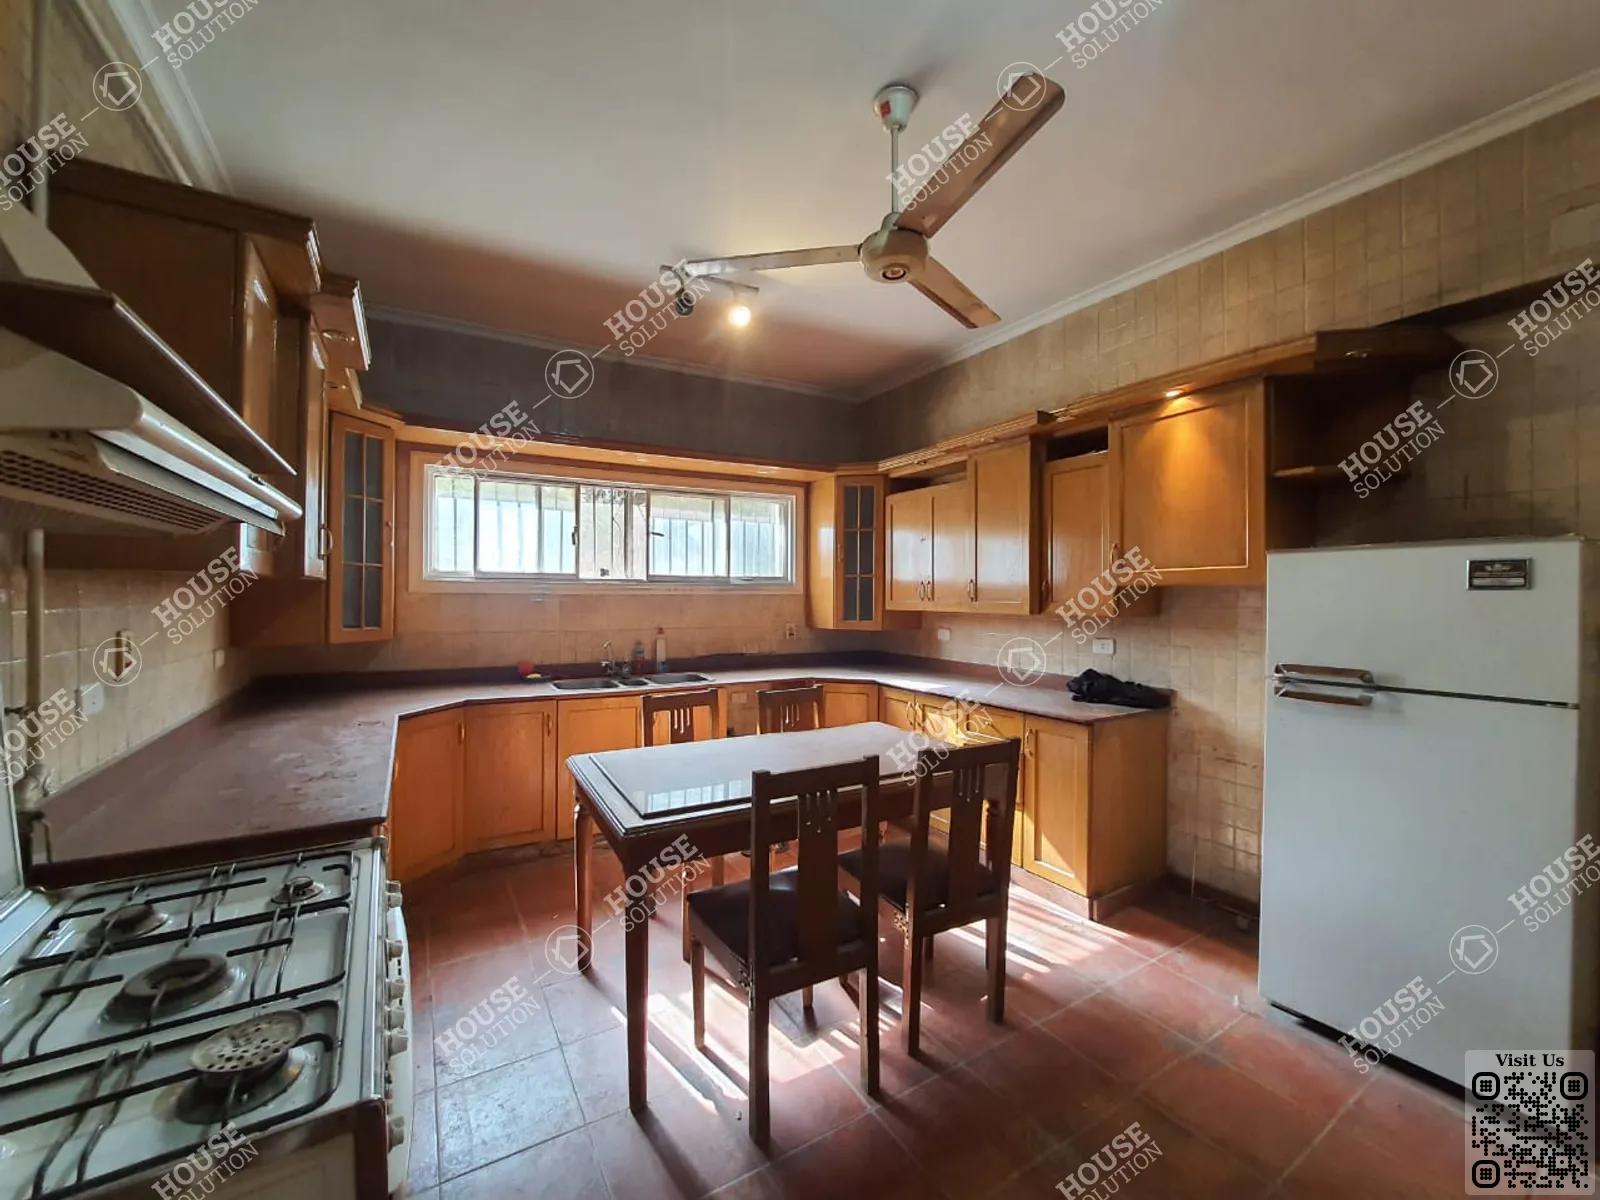 KITCHEN  @ Office spaces For Rent In Maadi Maadi Sarayat Area: 700 m² consists of 5 Bedrooms 4 Bathrooms Semi furnished 5 stars #5315-2